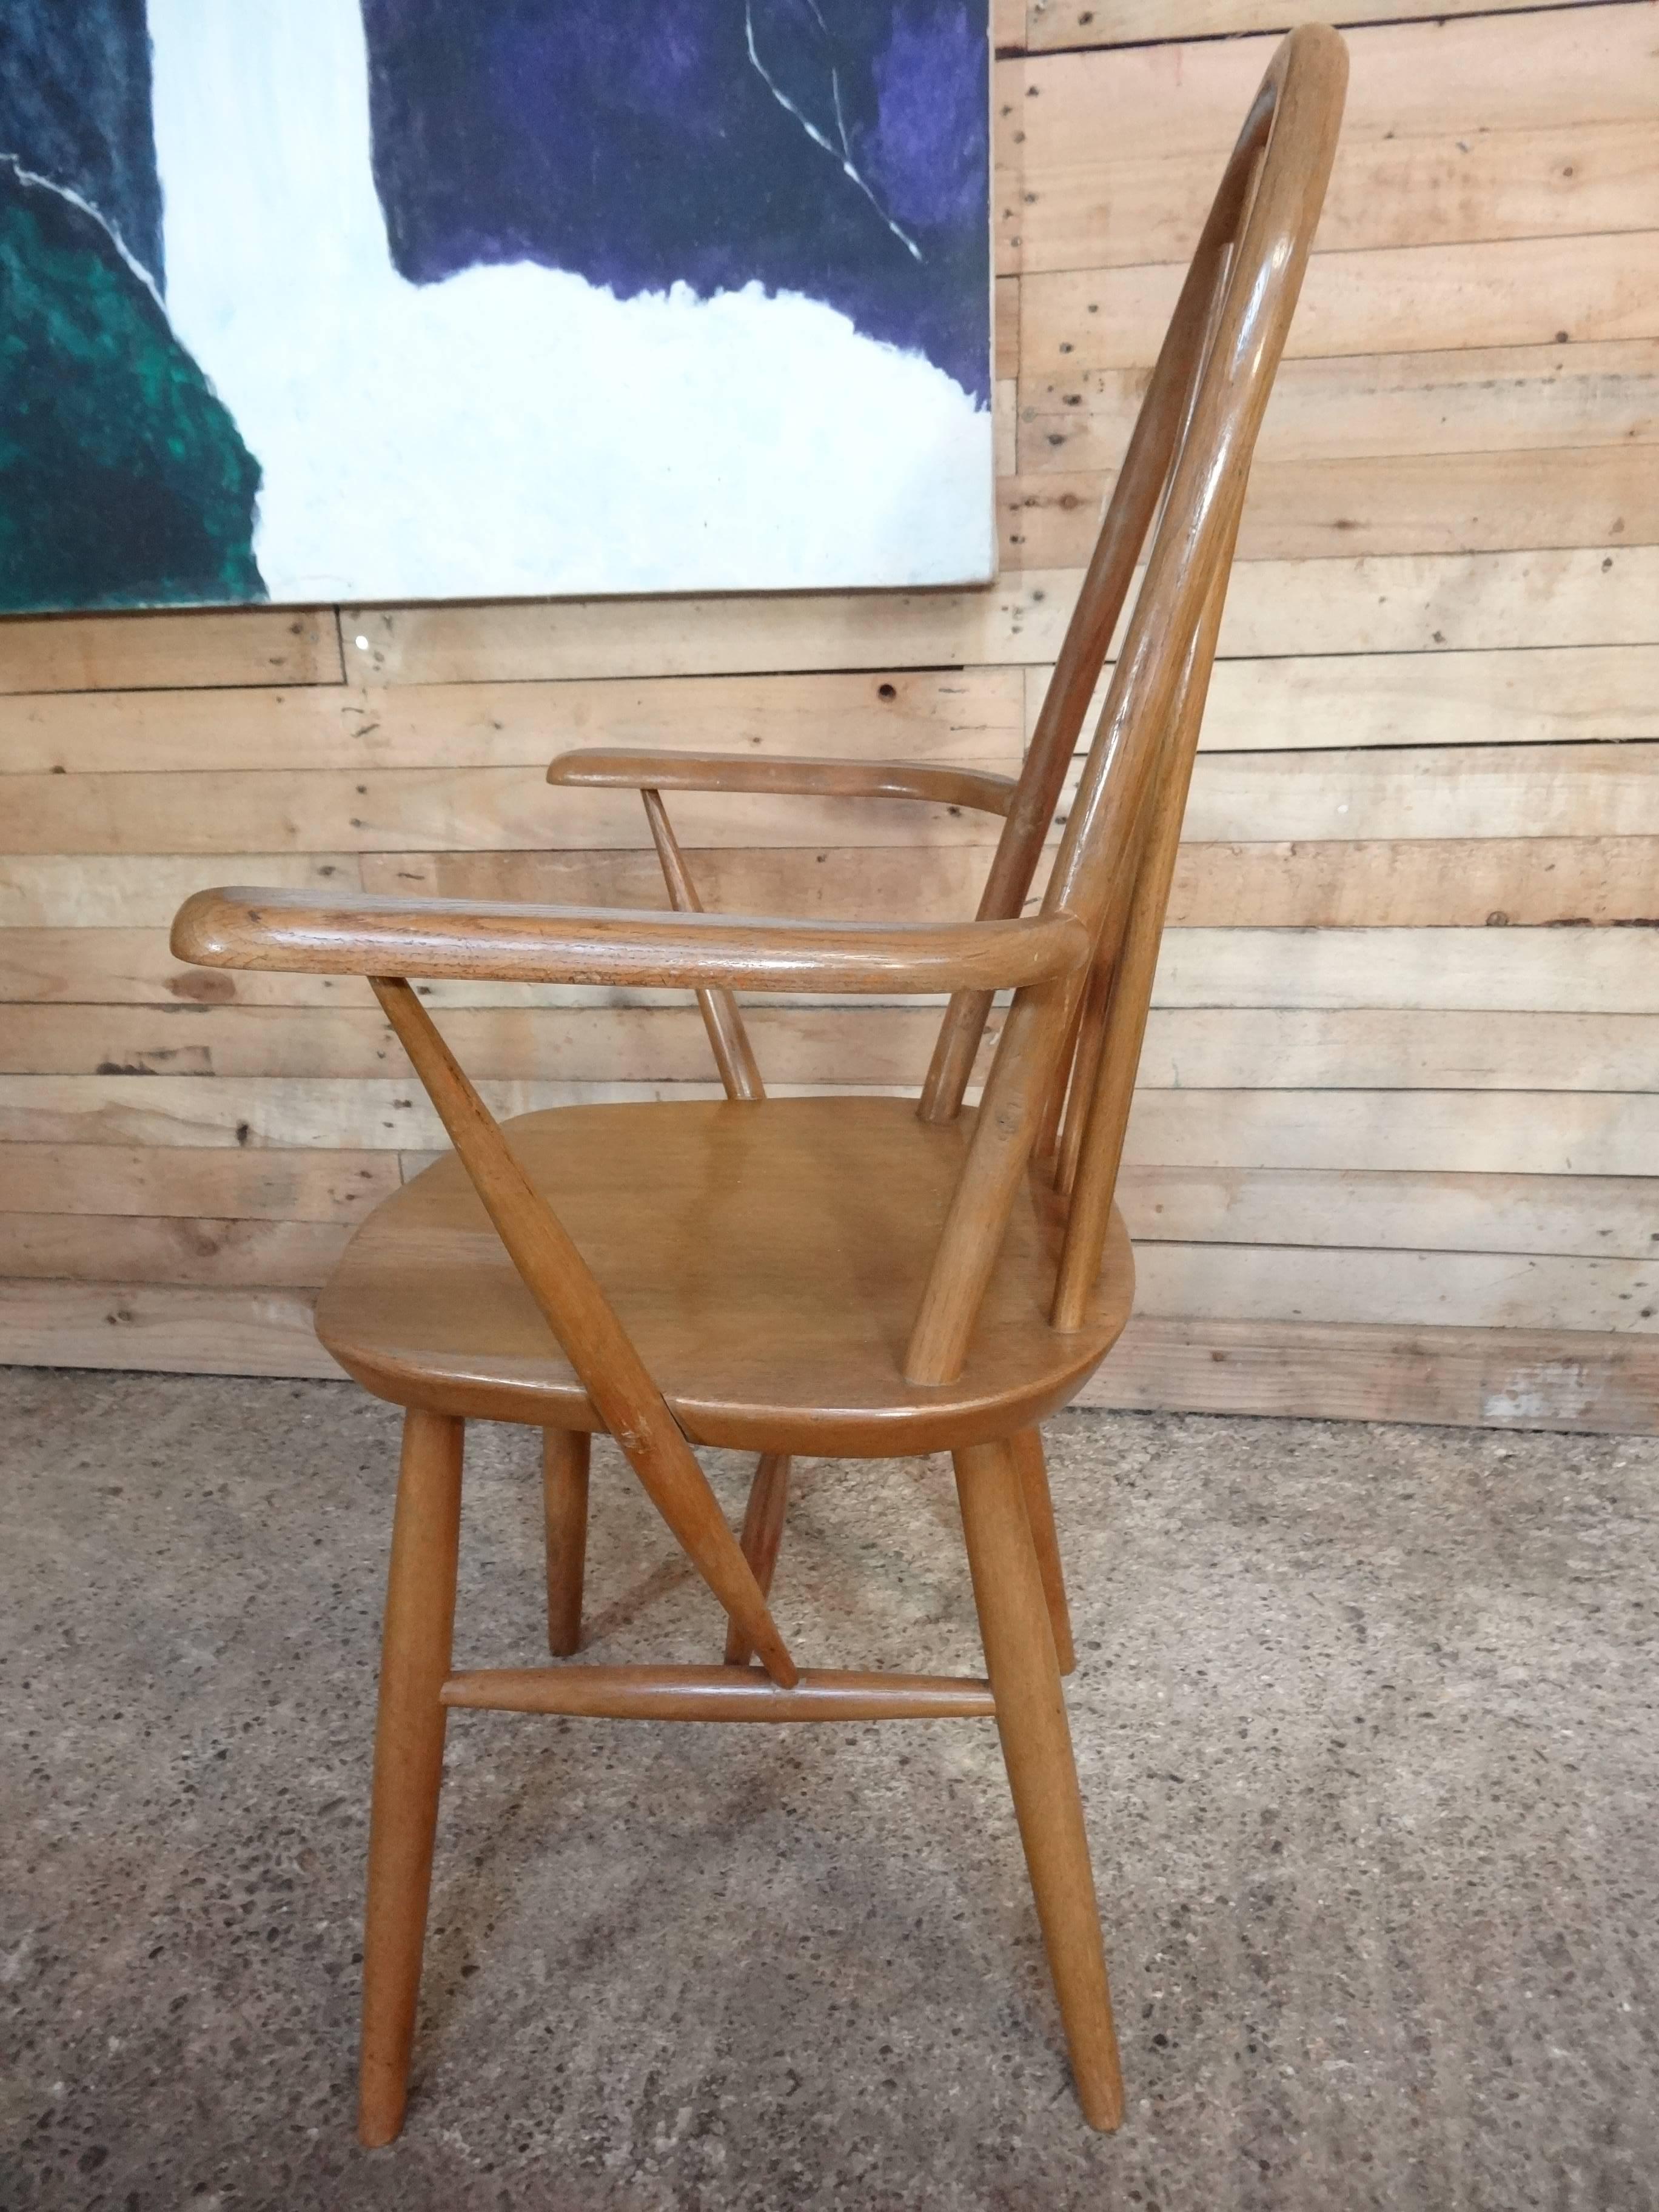 20th century retro vintage wooden armchair or bedroom chair.